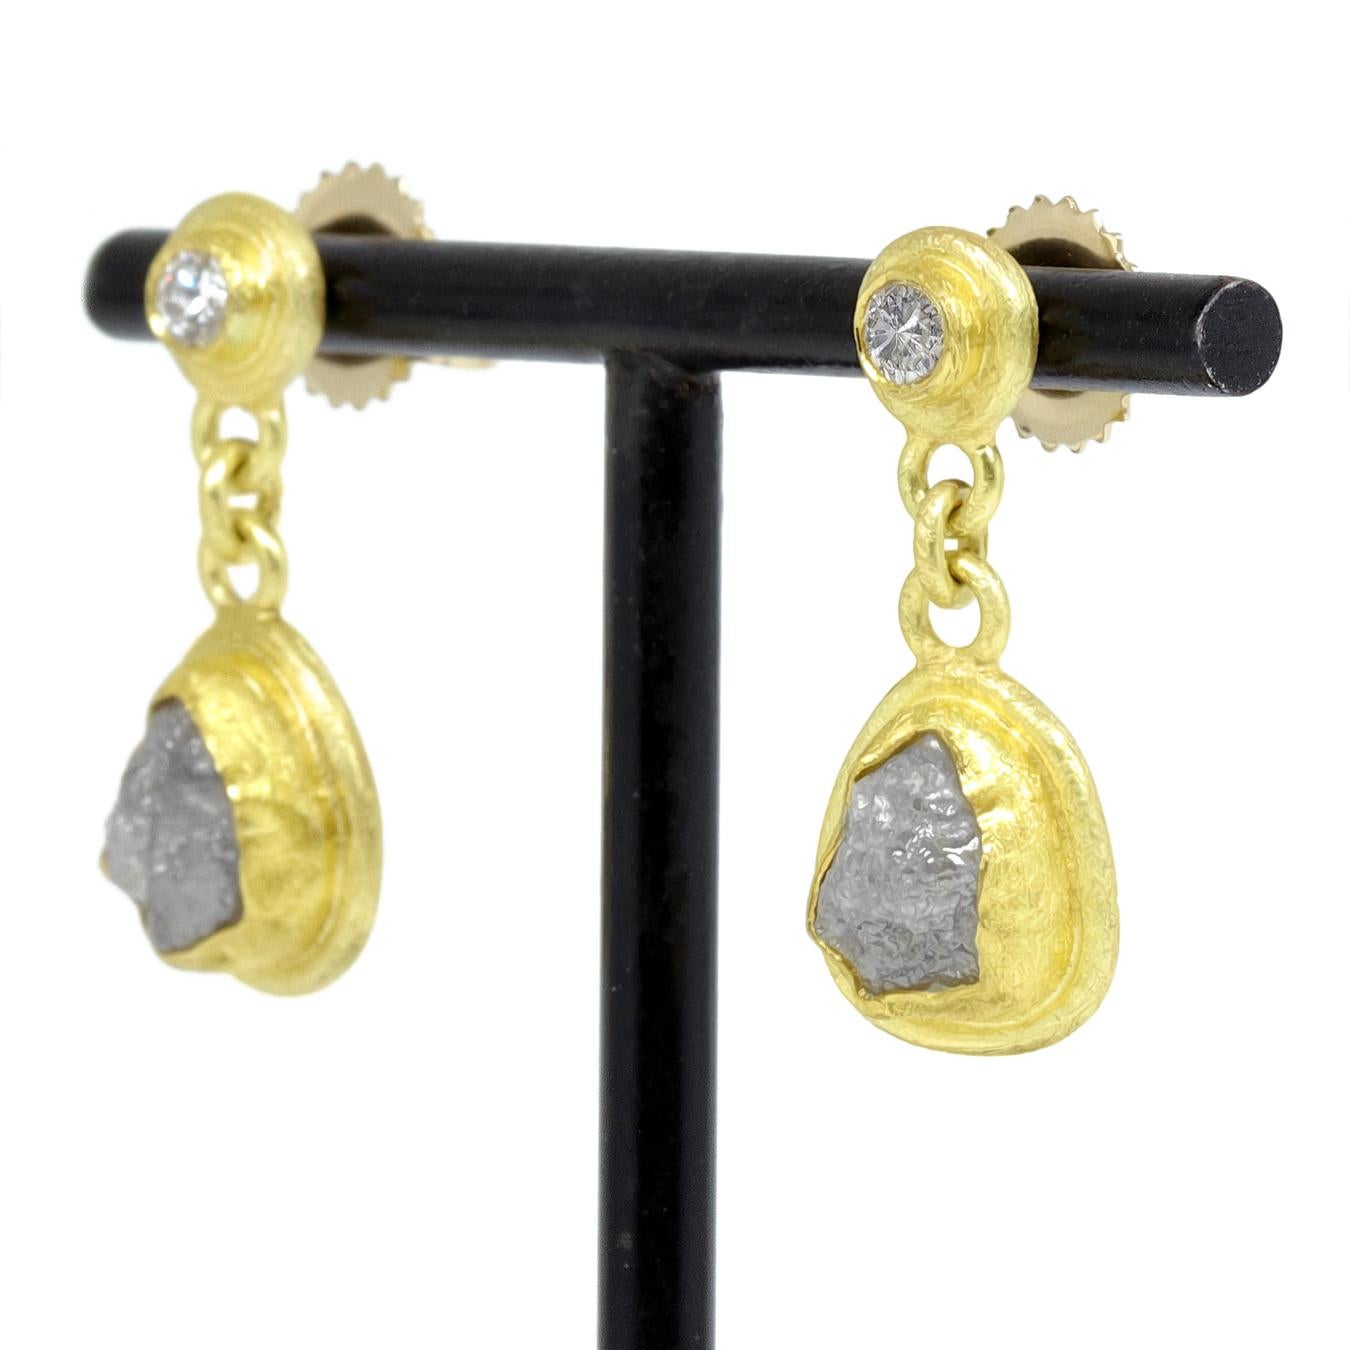 One of a Kind Double Diamond Drop Earrings handmade by award-winning jewelry artist Petra Class with a bezel-set brilliant-cut diamond and a rough diamond individually wrapped and framed in the maker's signature-finished solid 22k yellow gold,